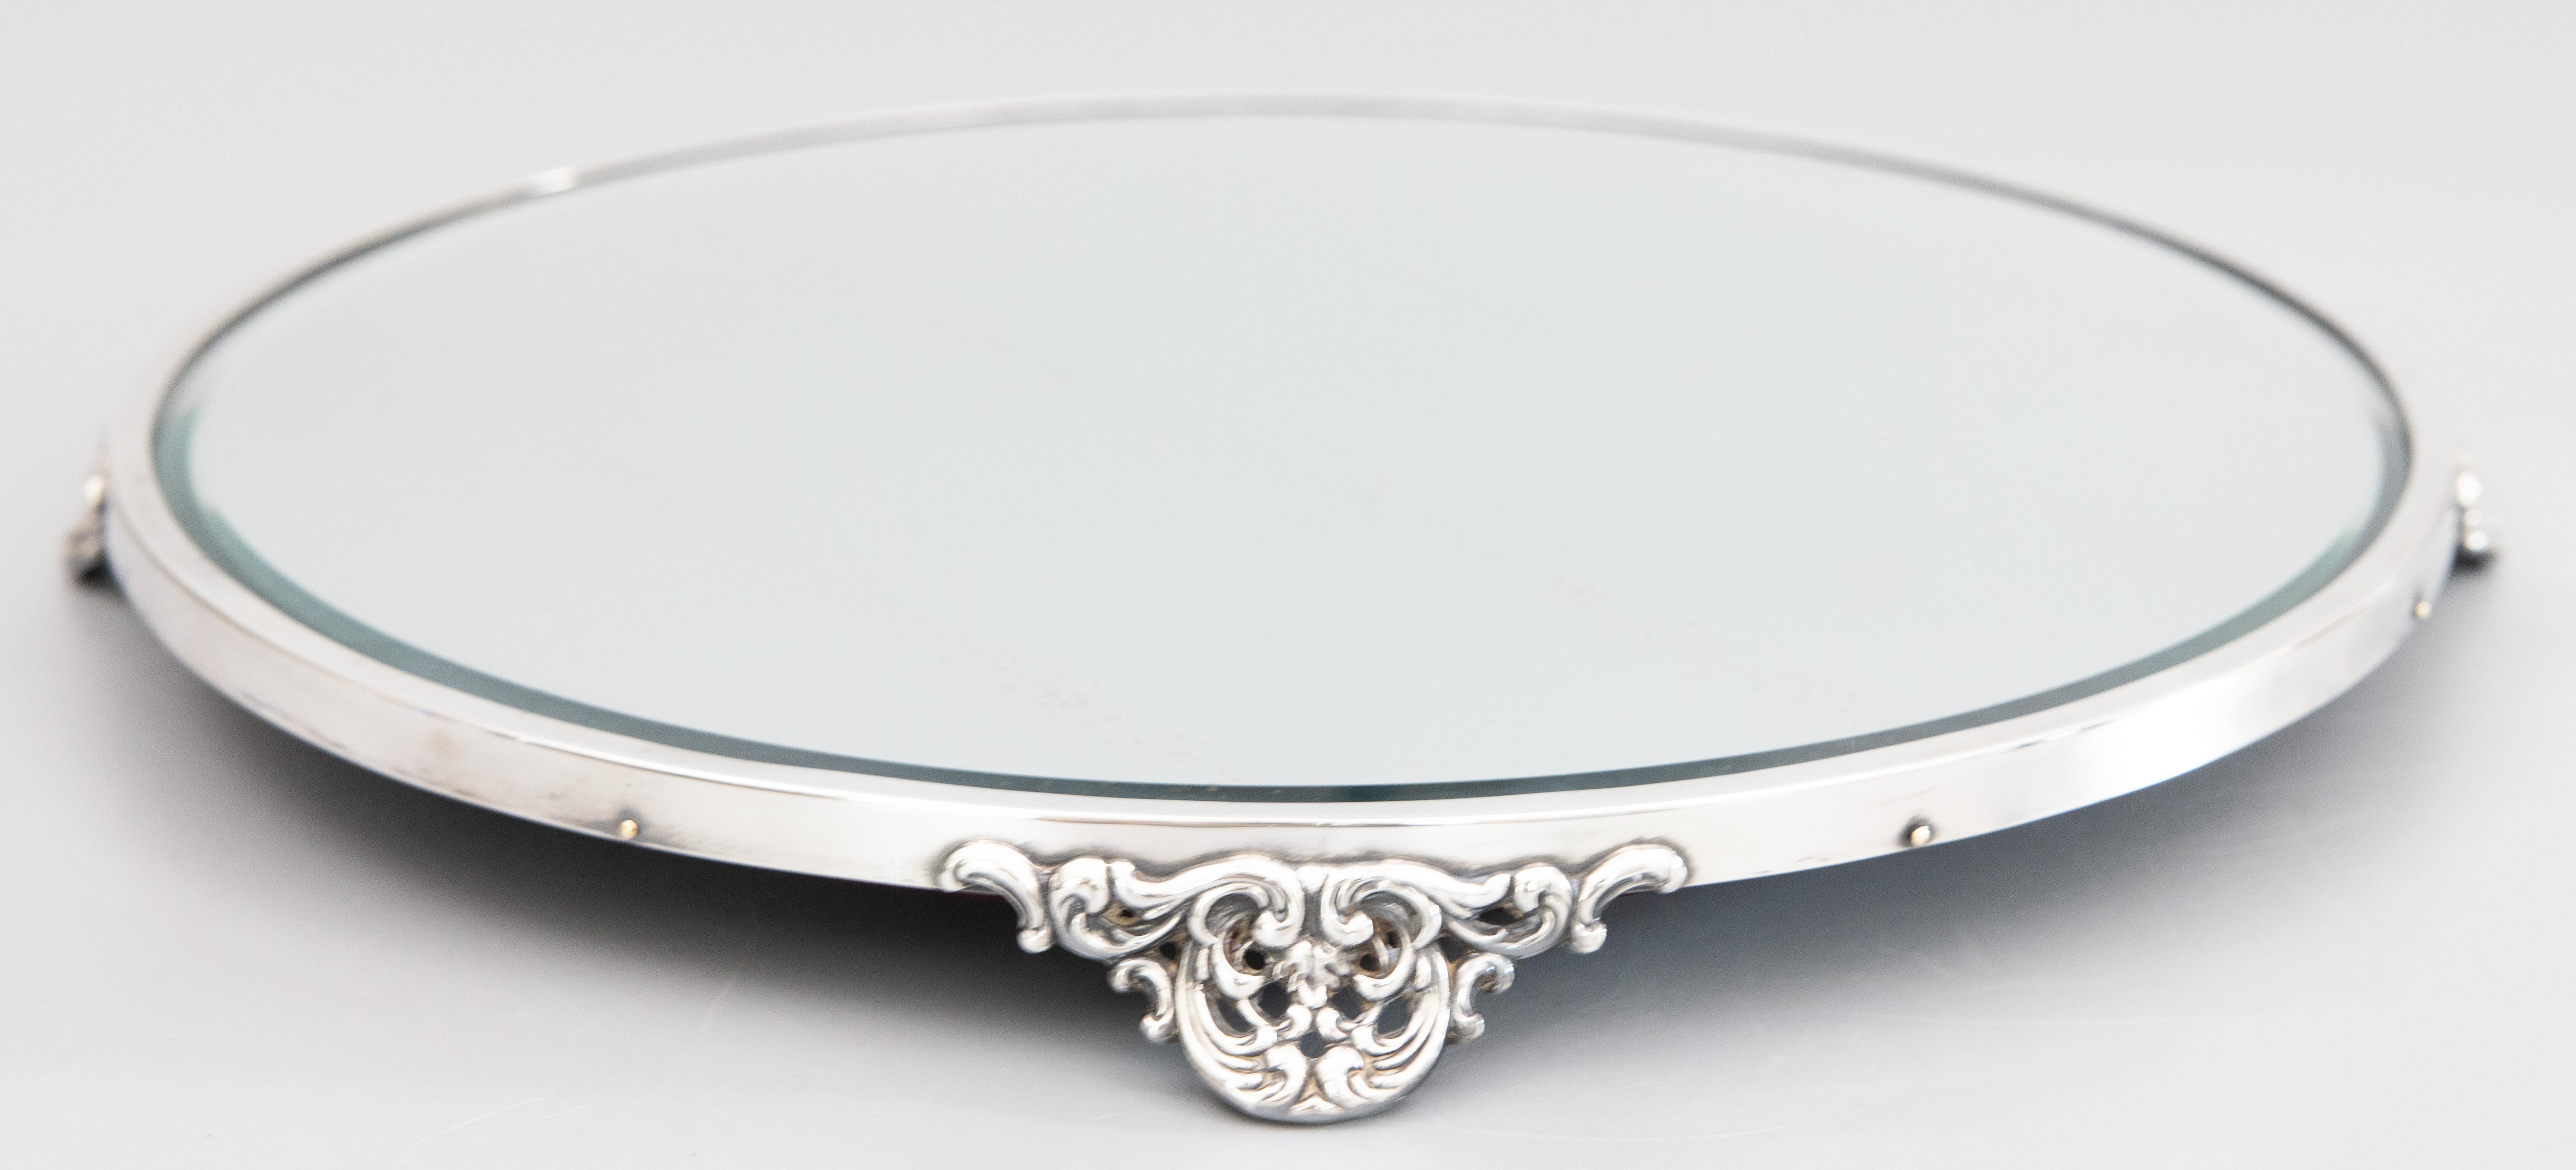 A gorgeous antique silverplate footed mirror plateau, circa 1920. No maker's mark. This beautiful plateau has a lovely silver patina, ornate feet, and an inset 13.75